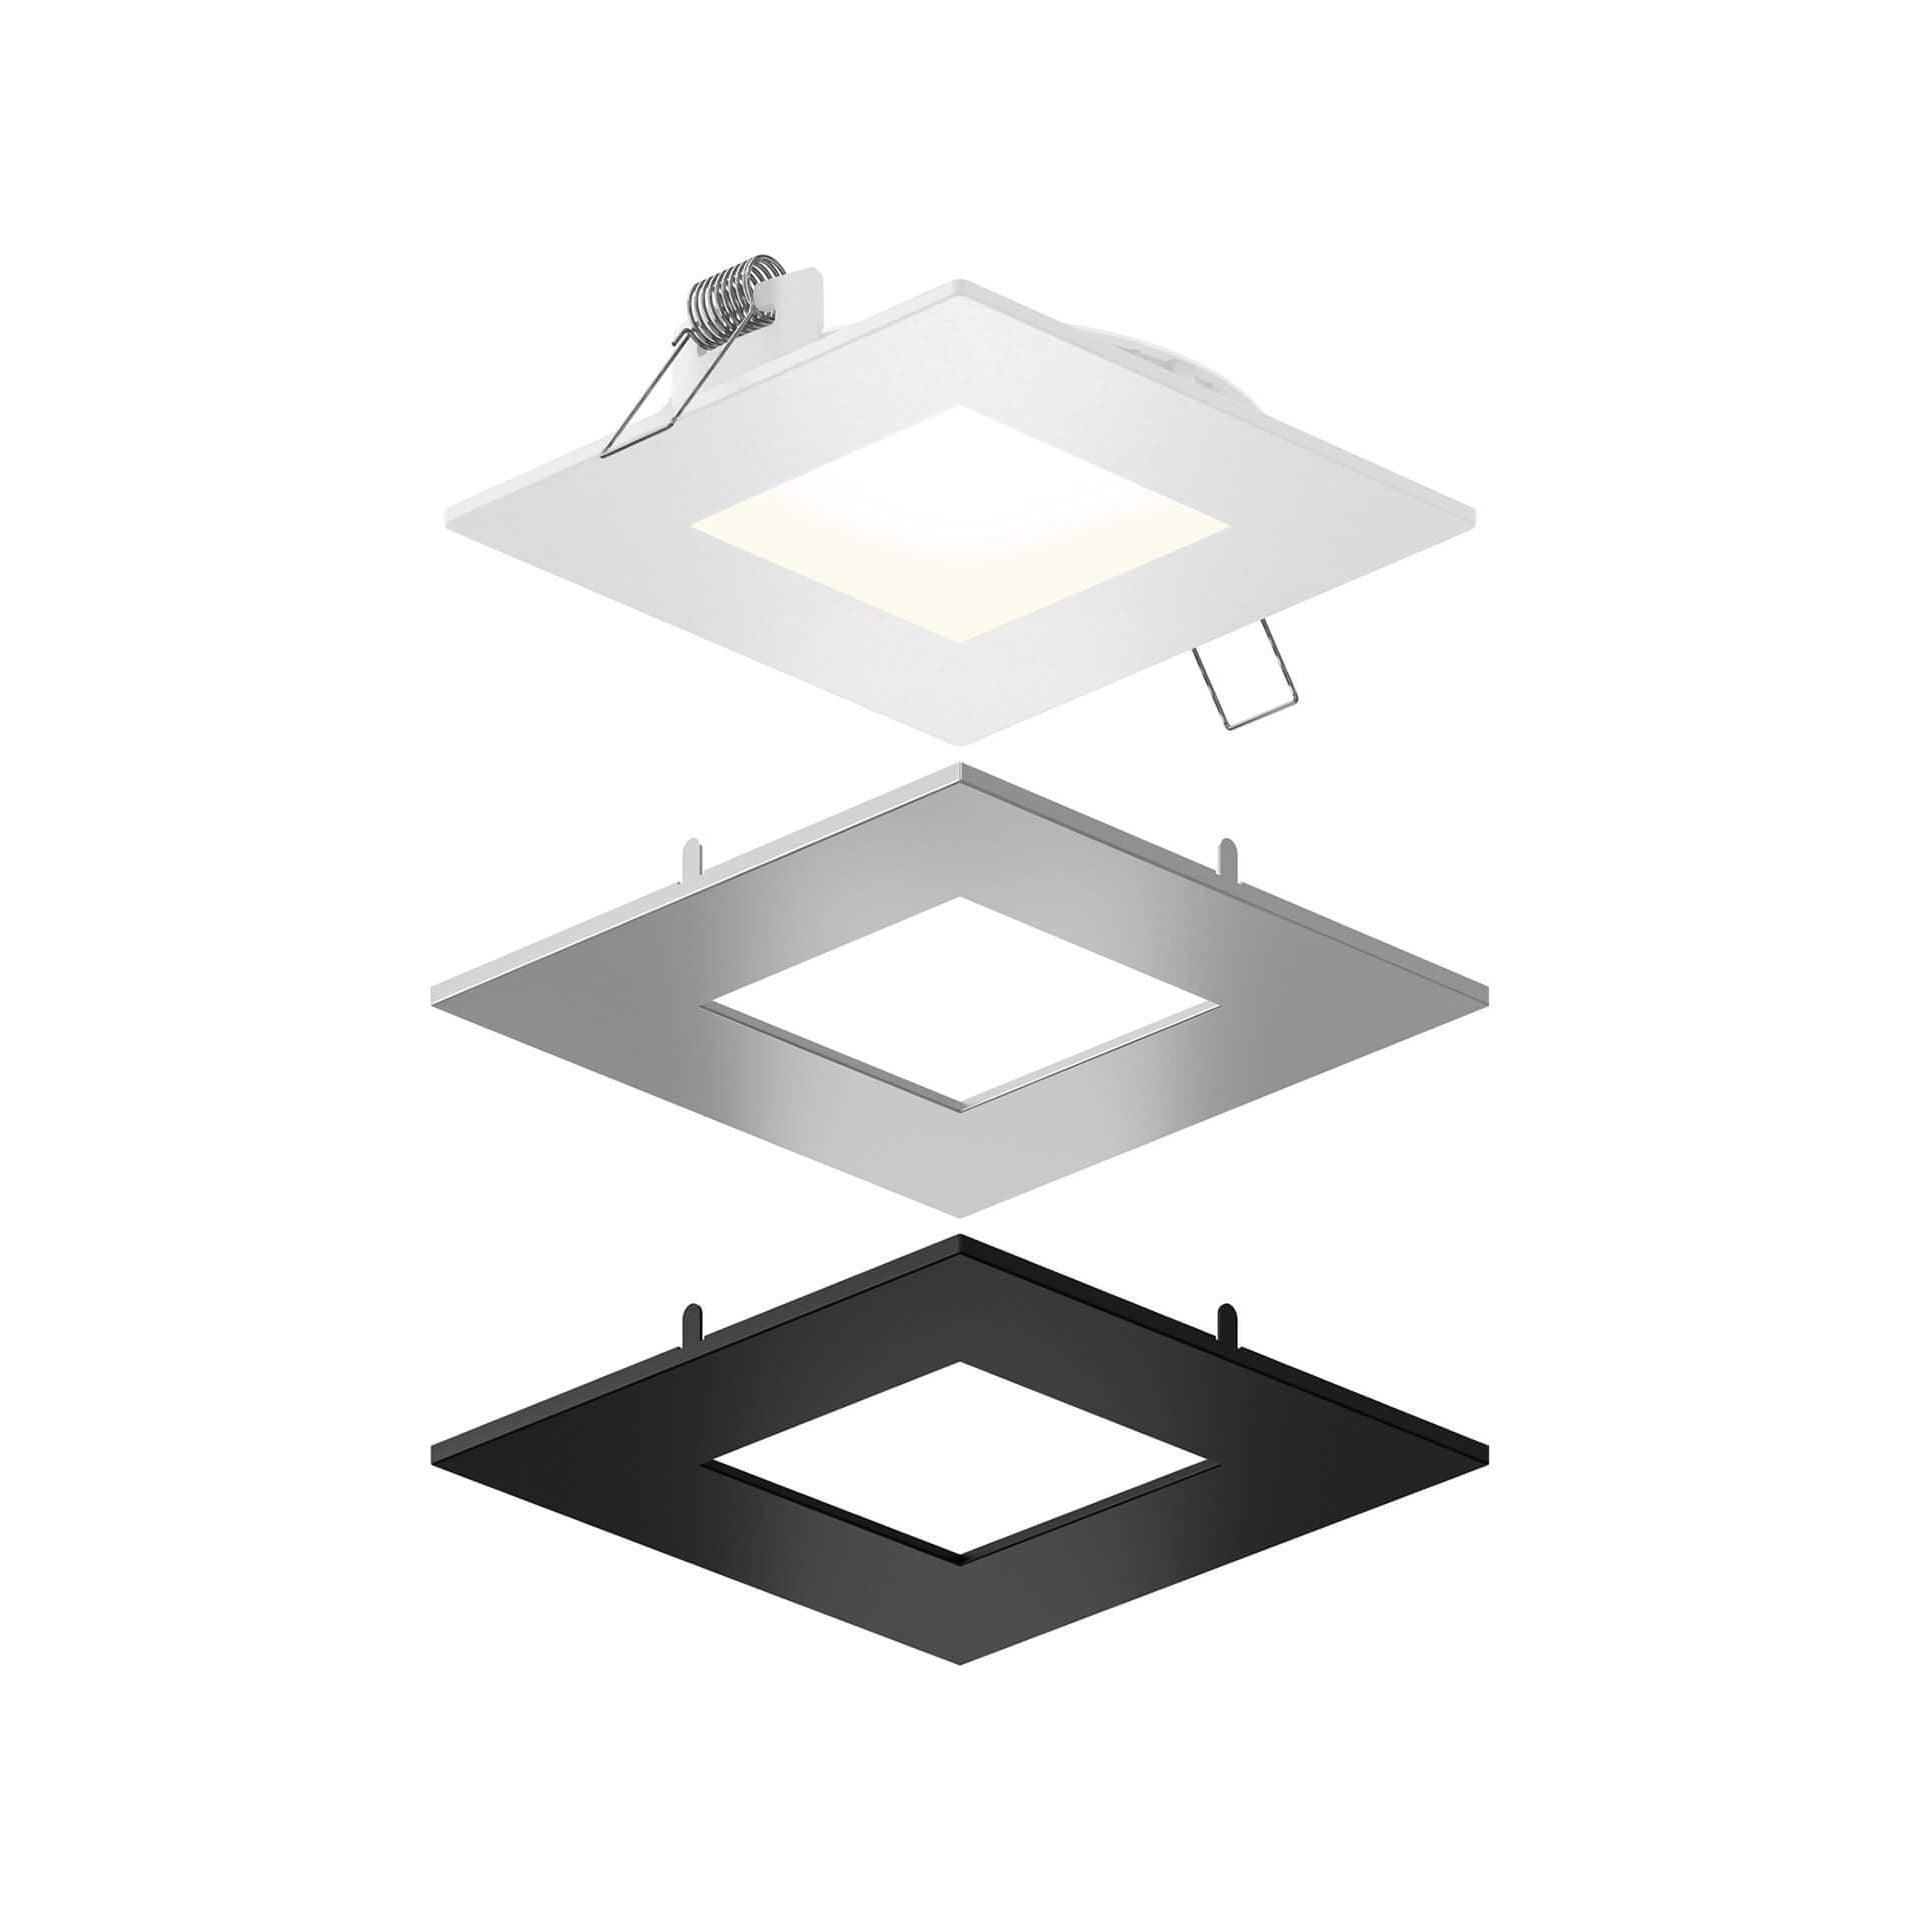 DALS - Square Led Recessed Panel Light With Multi Trim - Lights Canada